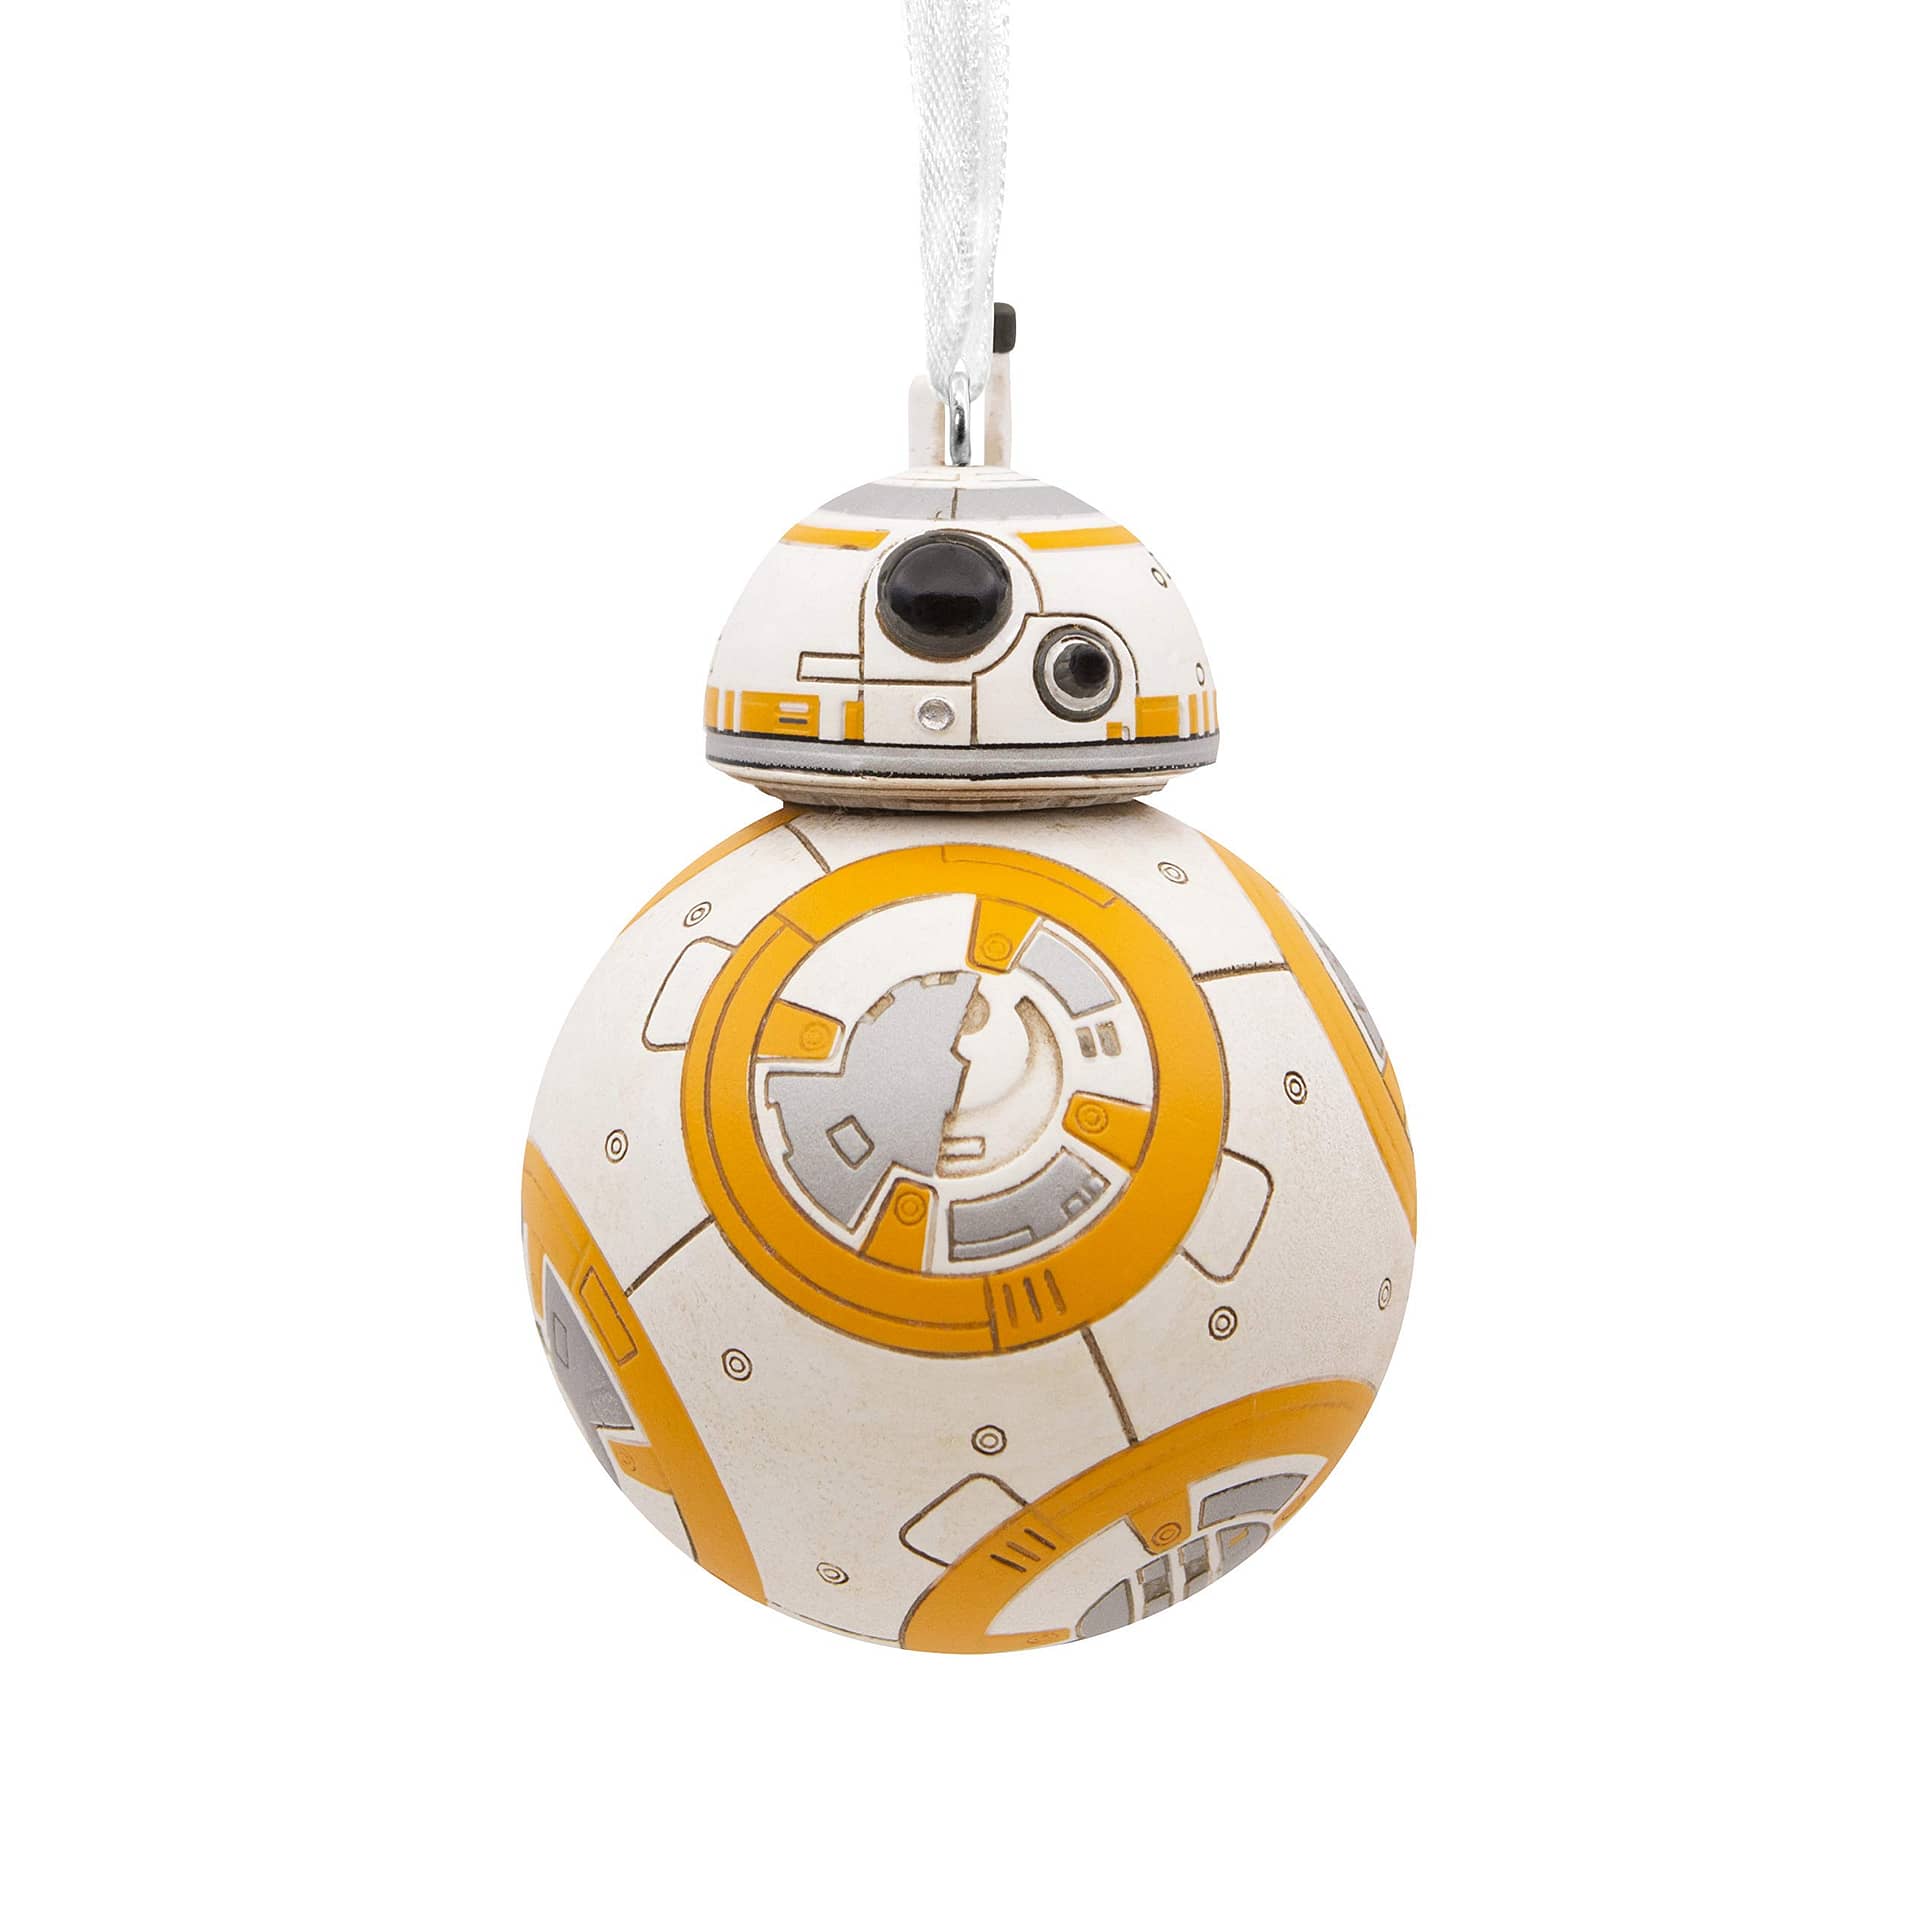 Christmas Star Wars Bb-8 Ornament Personalized Gifts